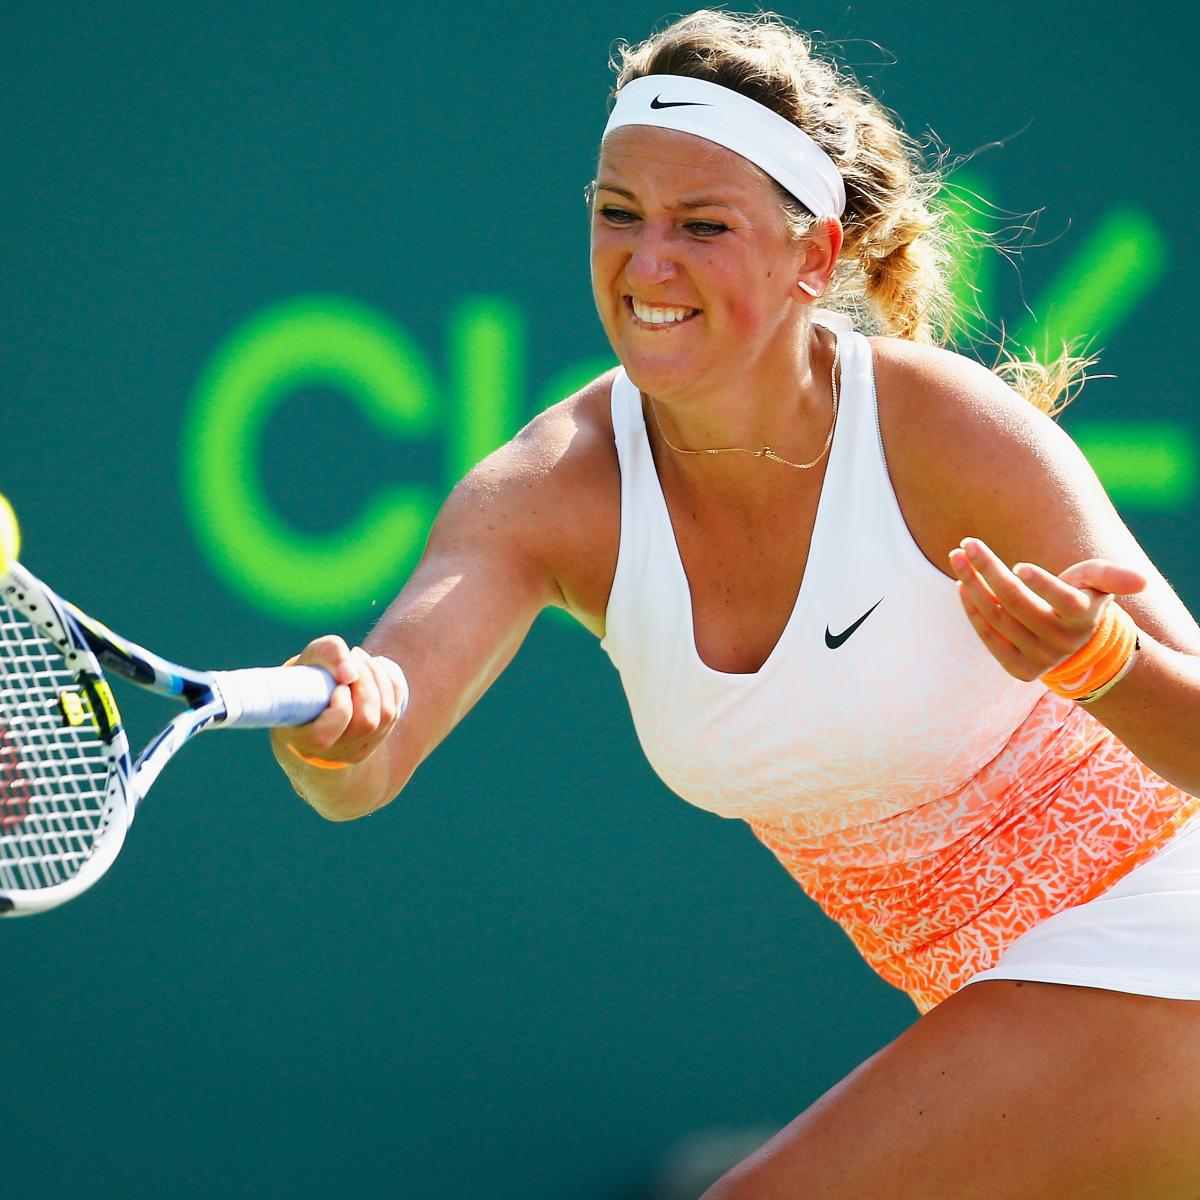 Miami Open Tennis 2015 Results: Scores, Bracket and Schedule After